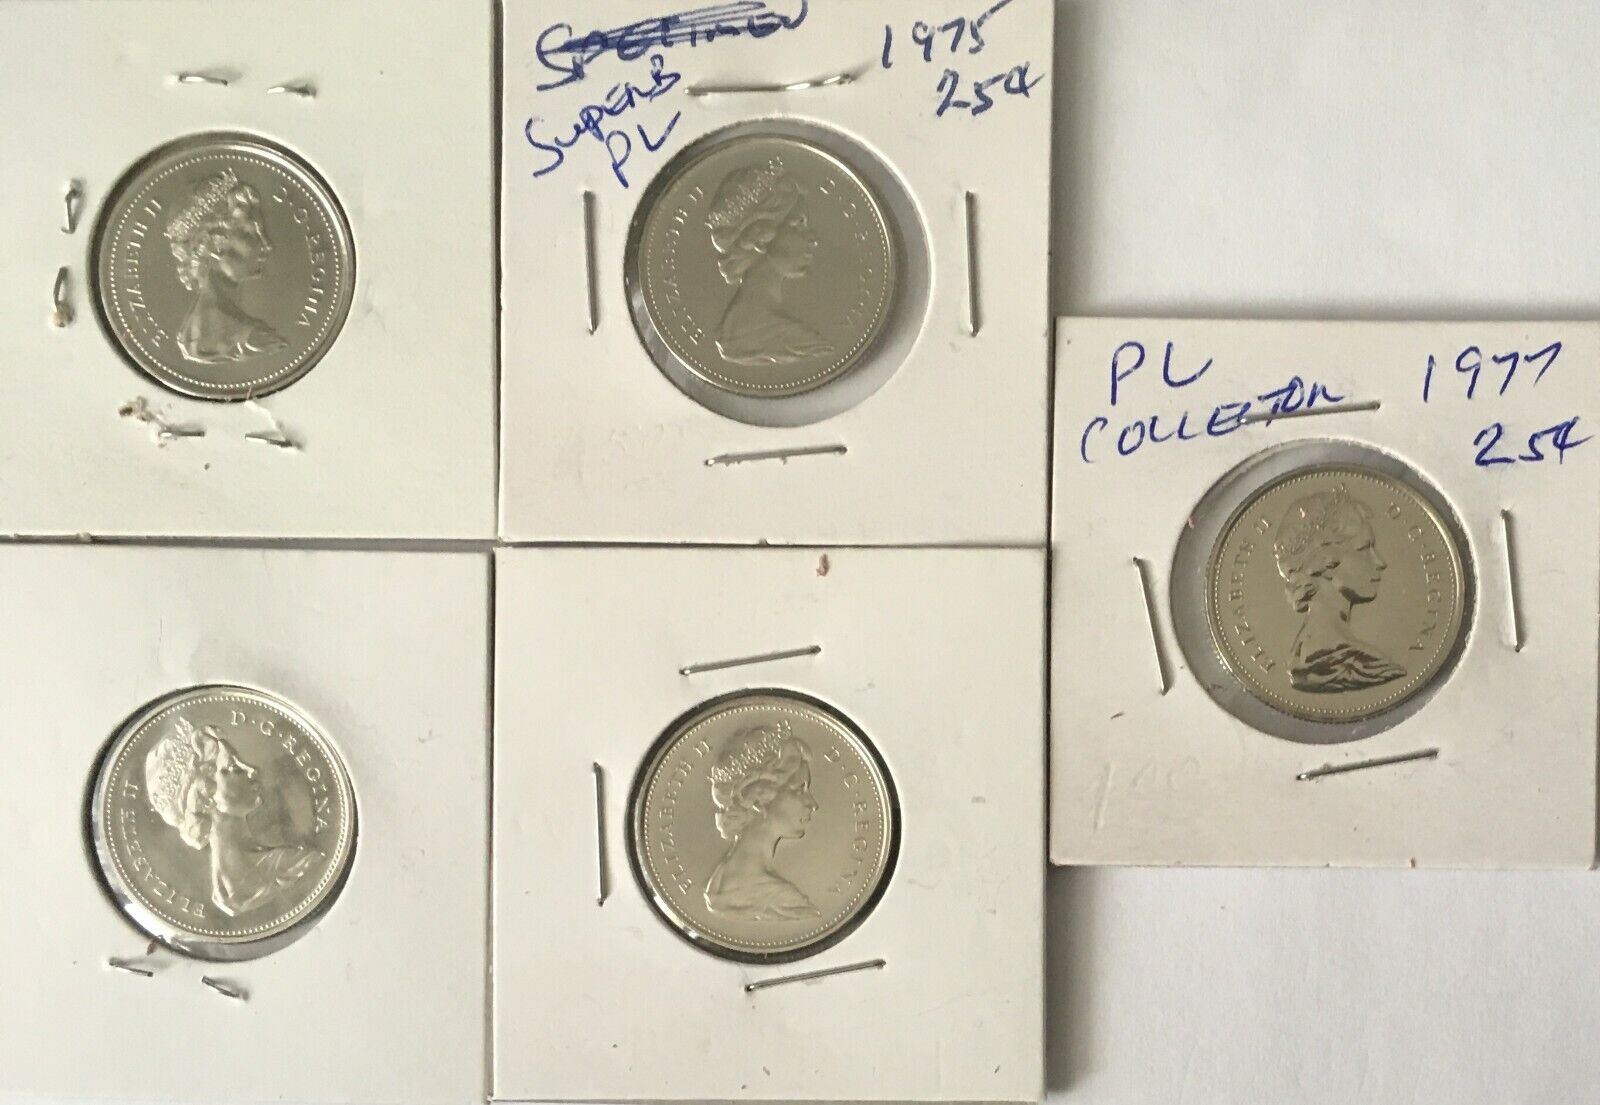 CANADA 1973 -1977 UNC 25 CENT  COIN FROM A HUGE COLLECTION KEEP FOLLOWING US Без бренда - фотография #2